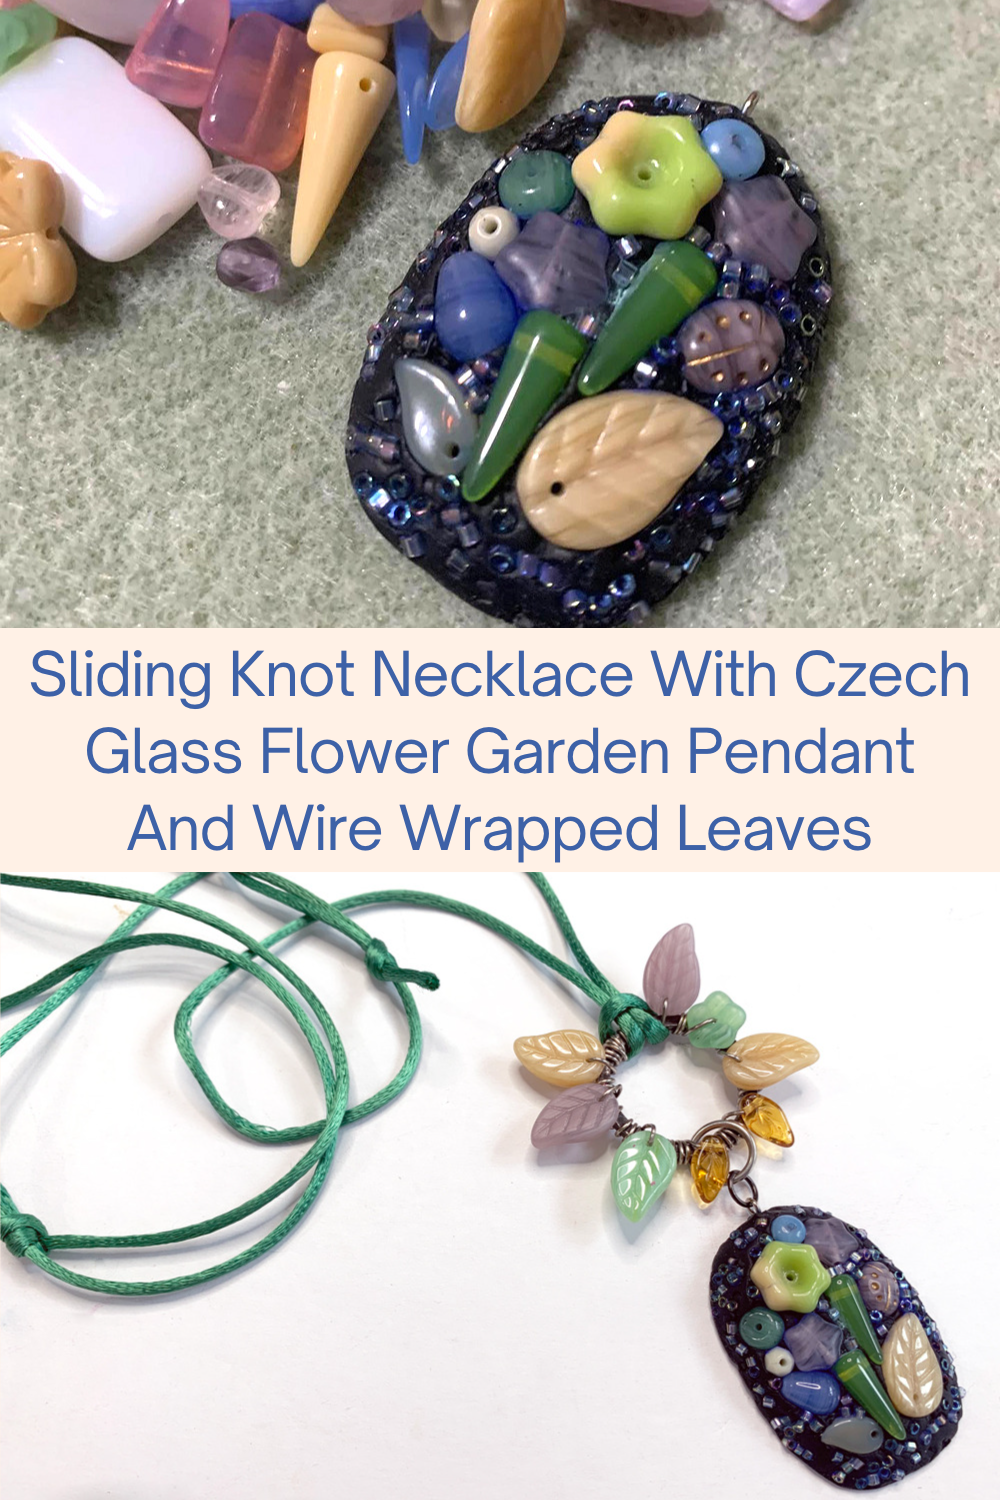 Sliding Knot Necklace With Czech Glass Flower Garden Pendant And Wire Wrapped Leaves Collage